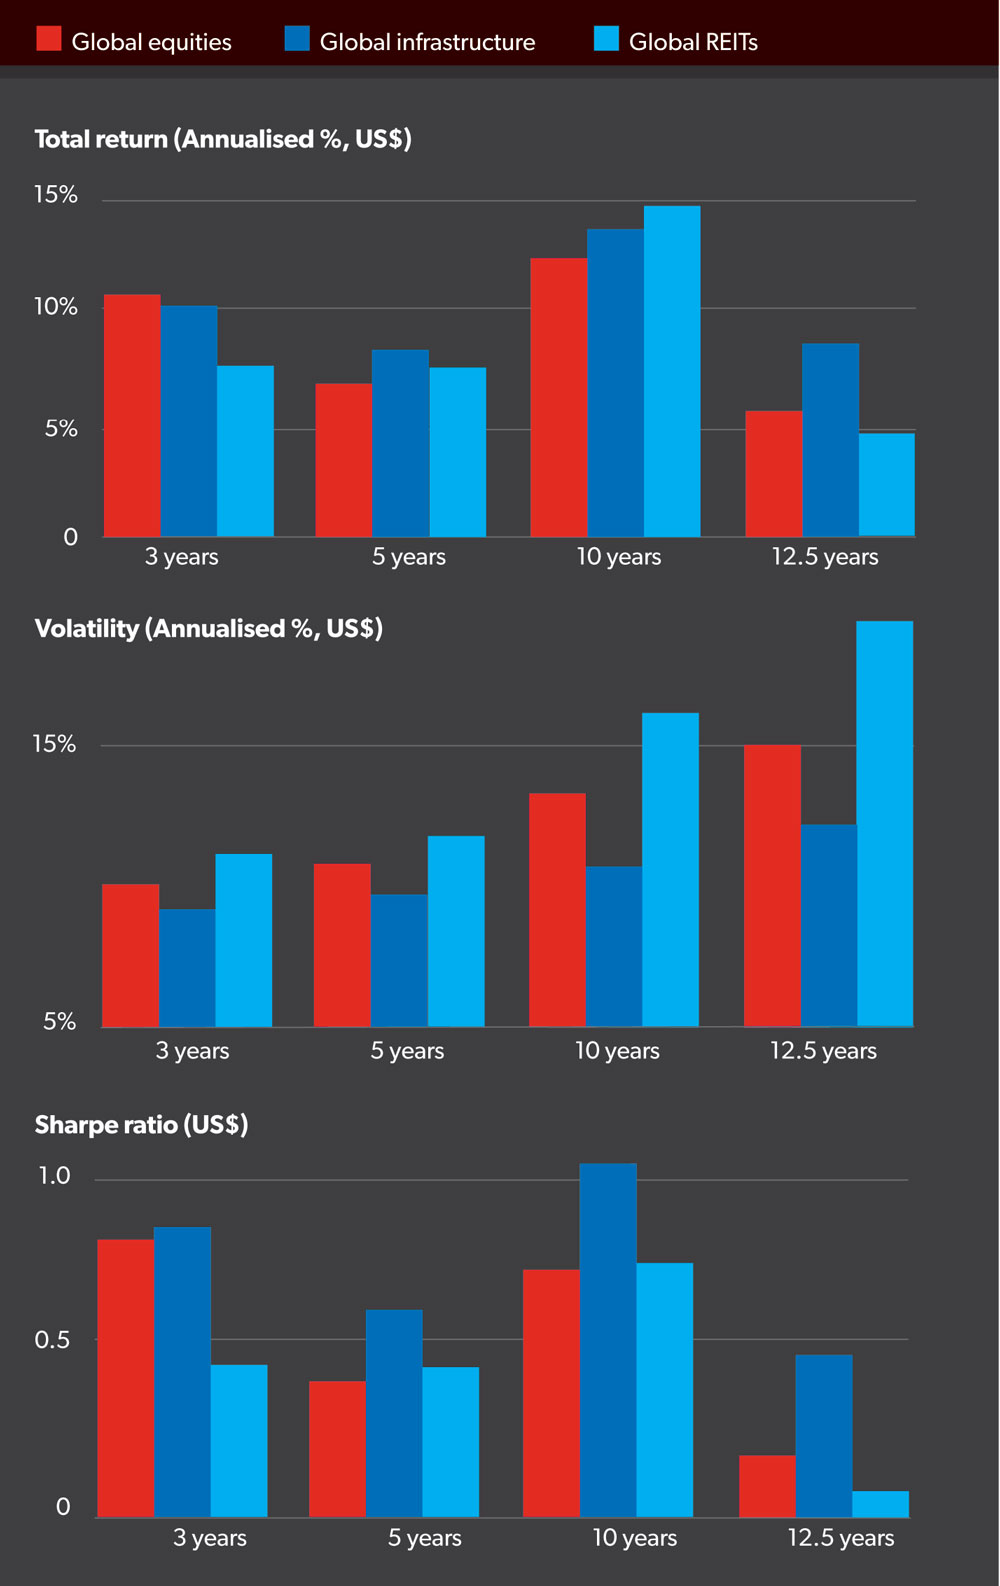 portfolio performance for global equities, infrastructure and REITs